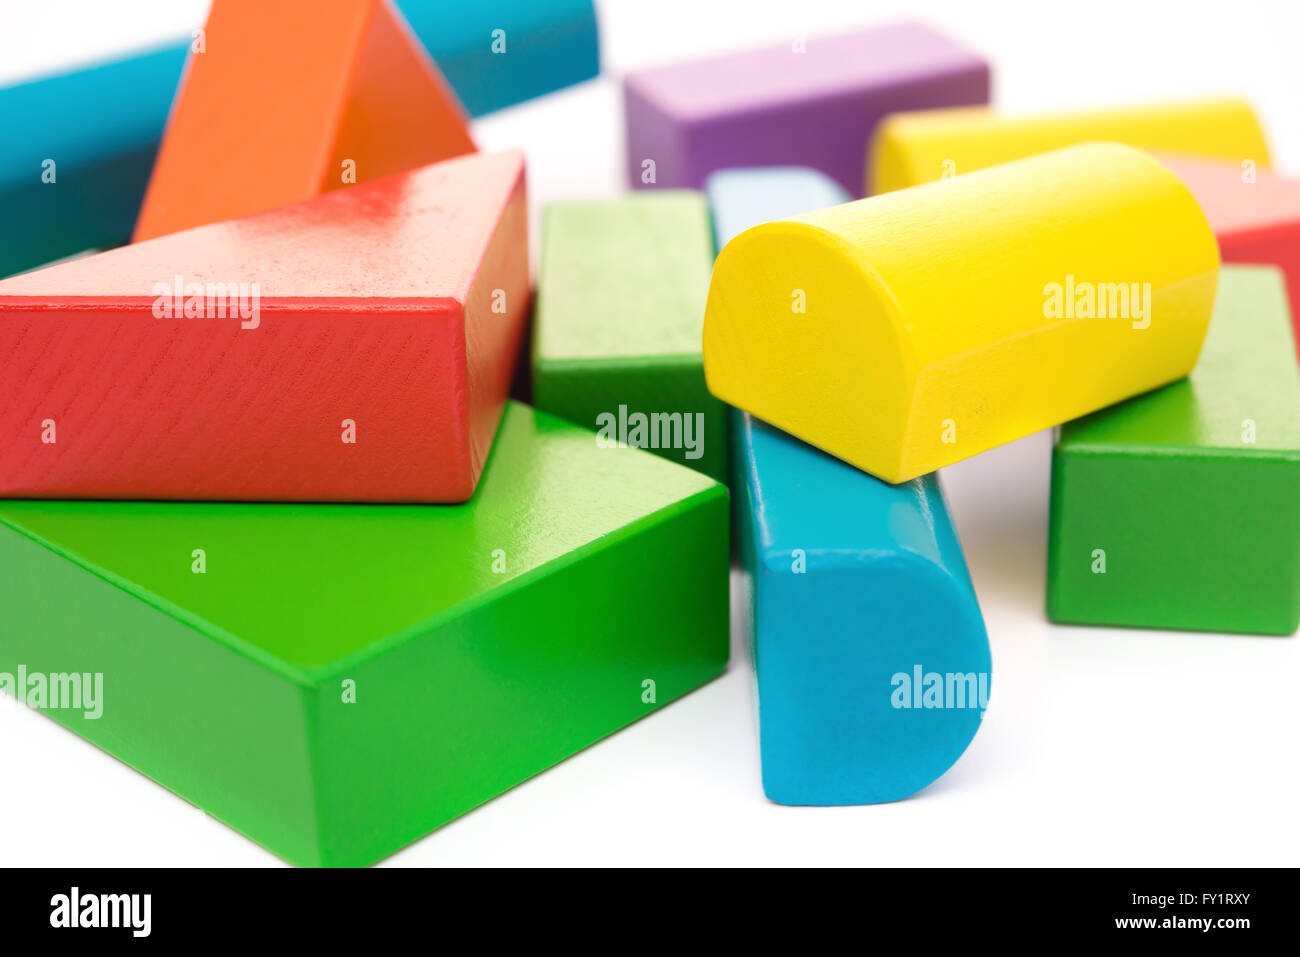 different color and shape wooden toy blocks on white background Stock Photo